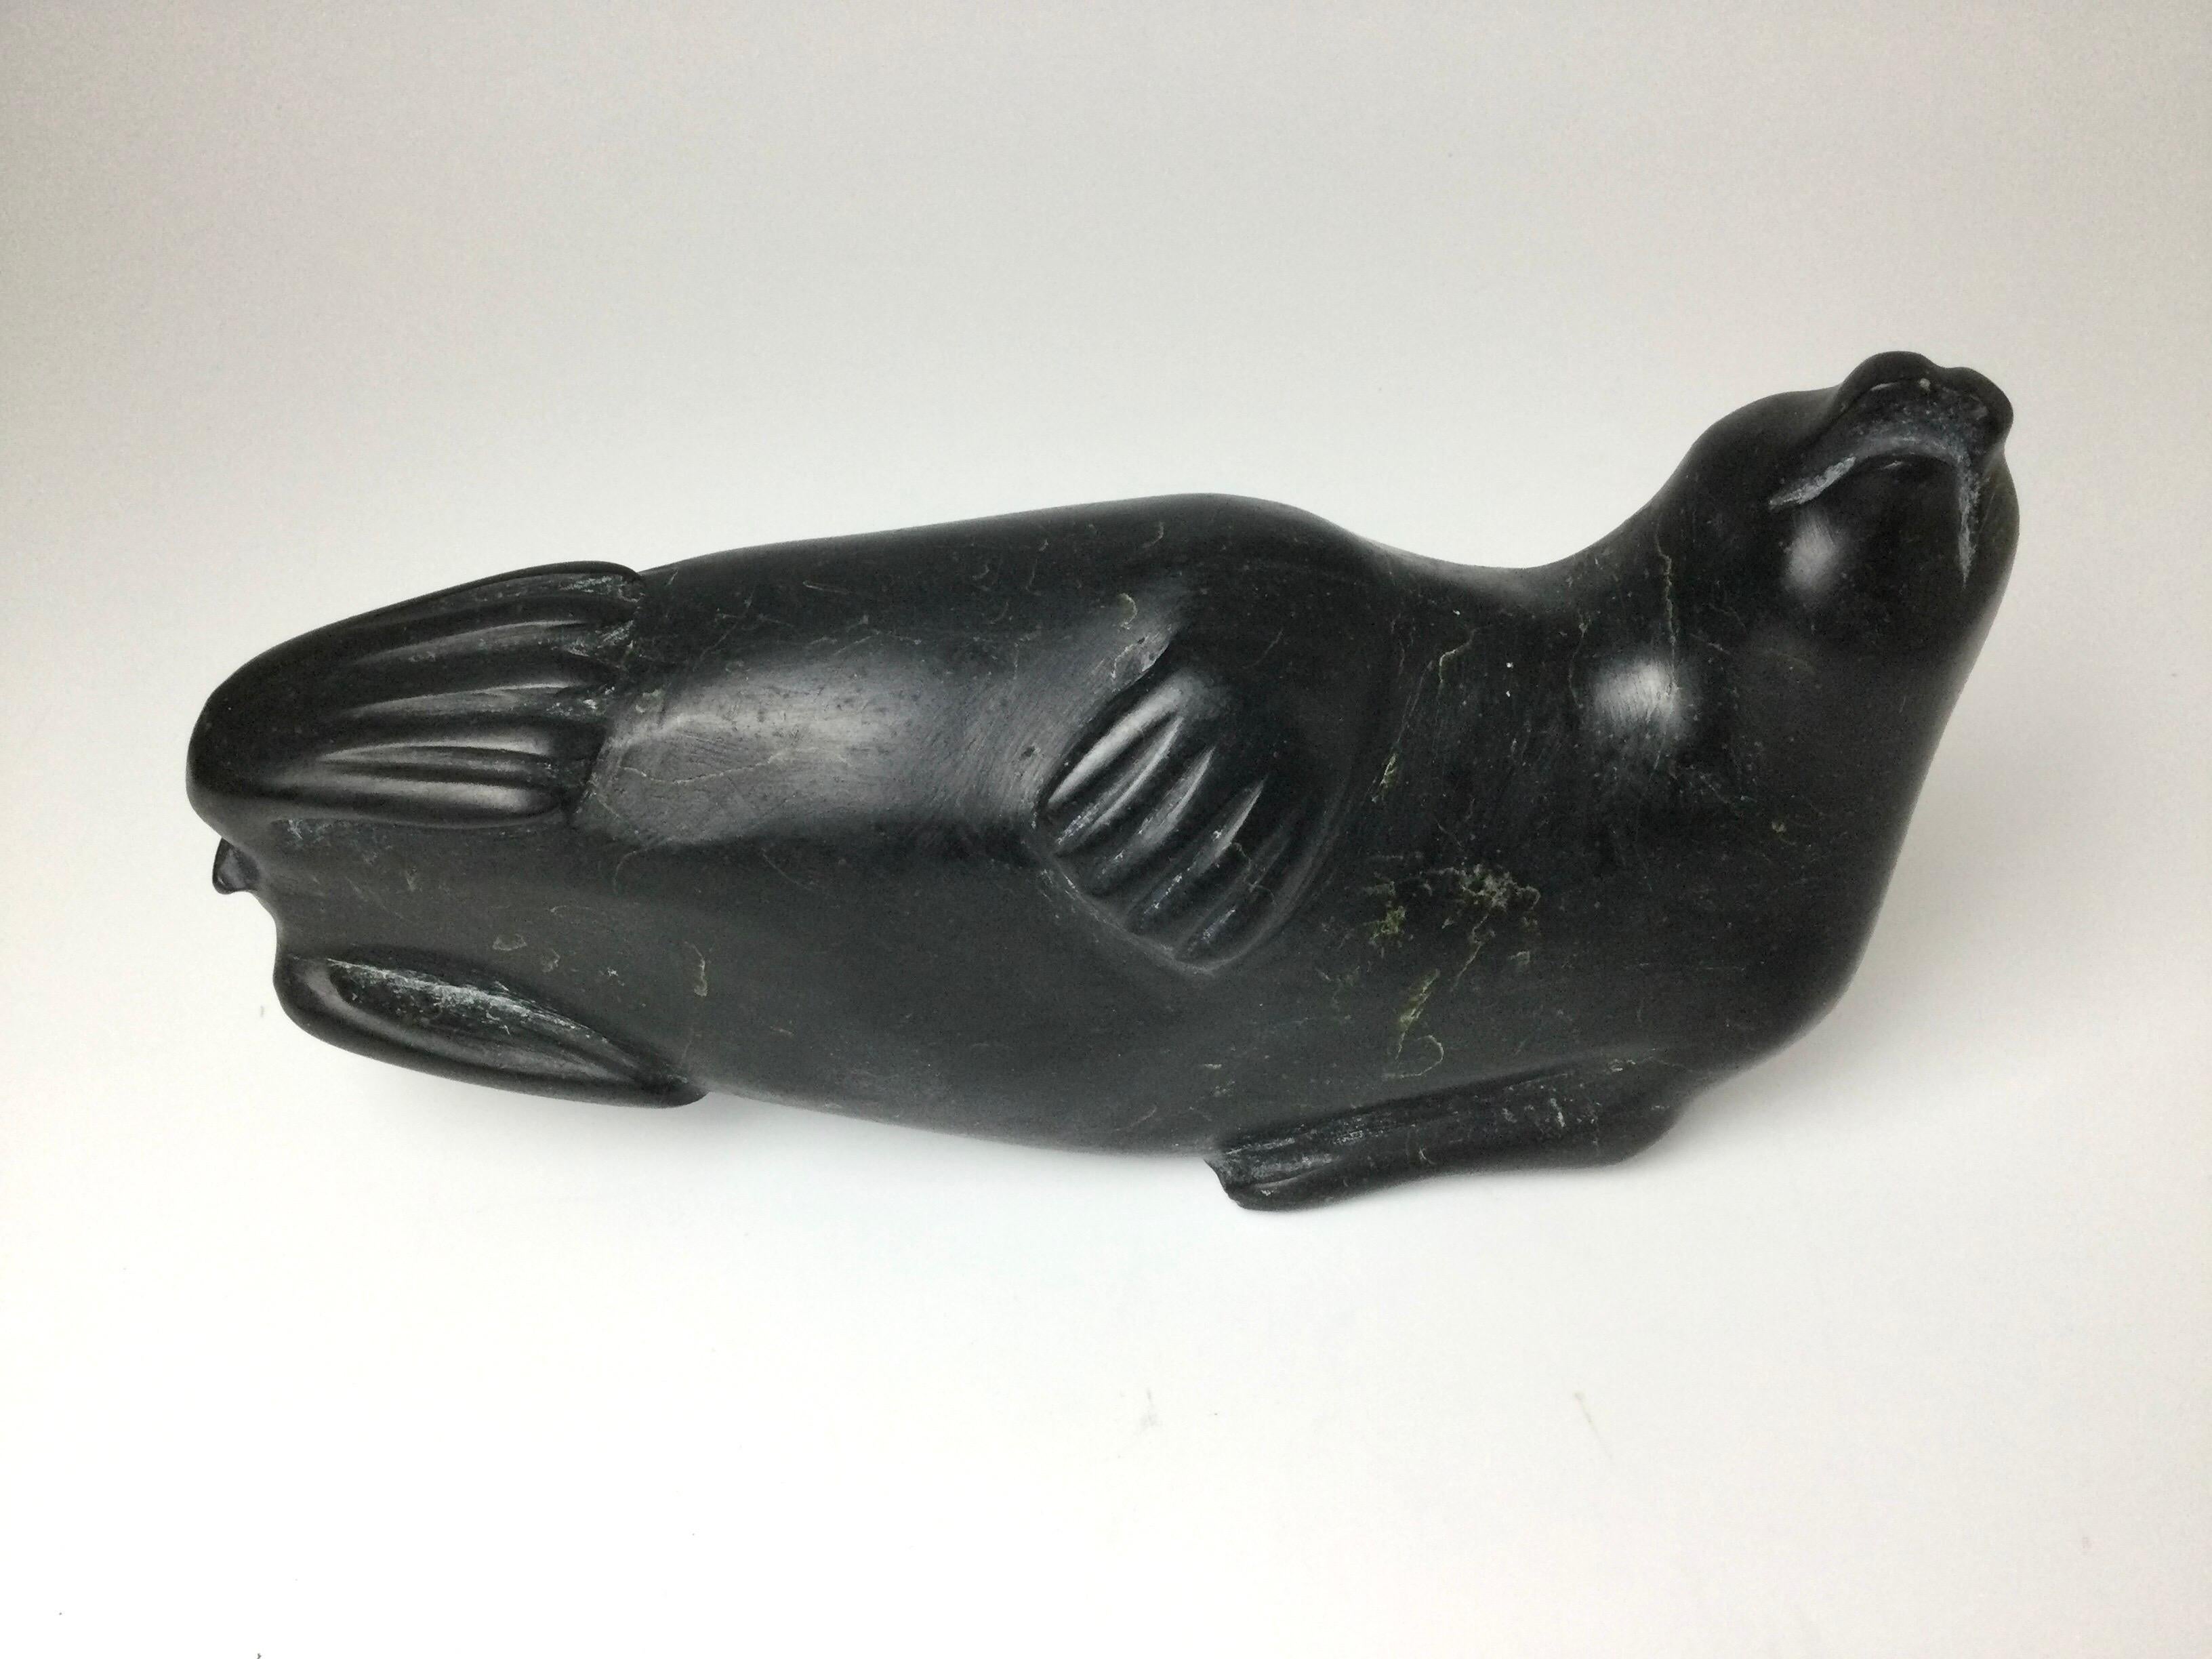 Inuit Eskimo stone carving of seal with original tag. I believe the carver to be C. D. Teen. I purchased out of a home 20 years and was told at that time it had been on the shelf for as long as the family could remember. I feel it is from the